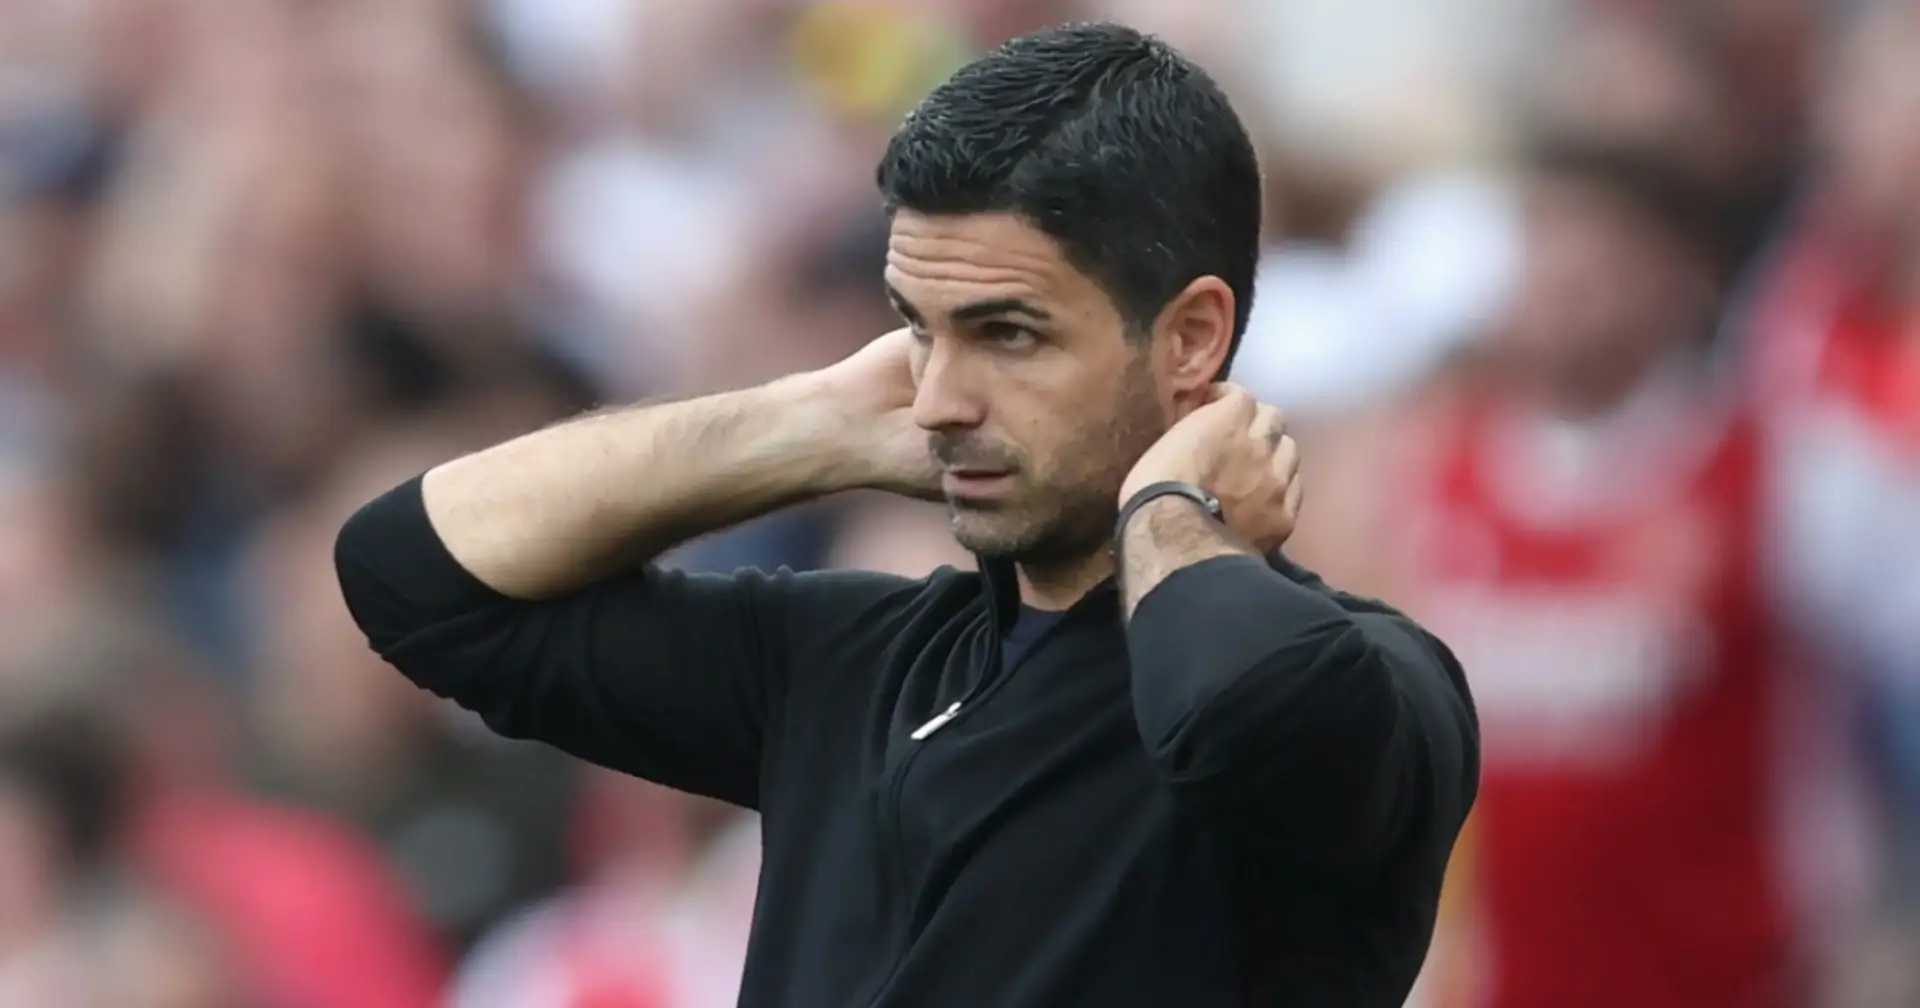 'We had quite a lot of issues': Arteta explains absence of 7 players for the West Ham game 